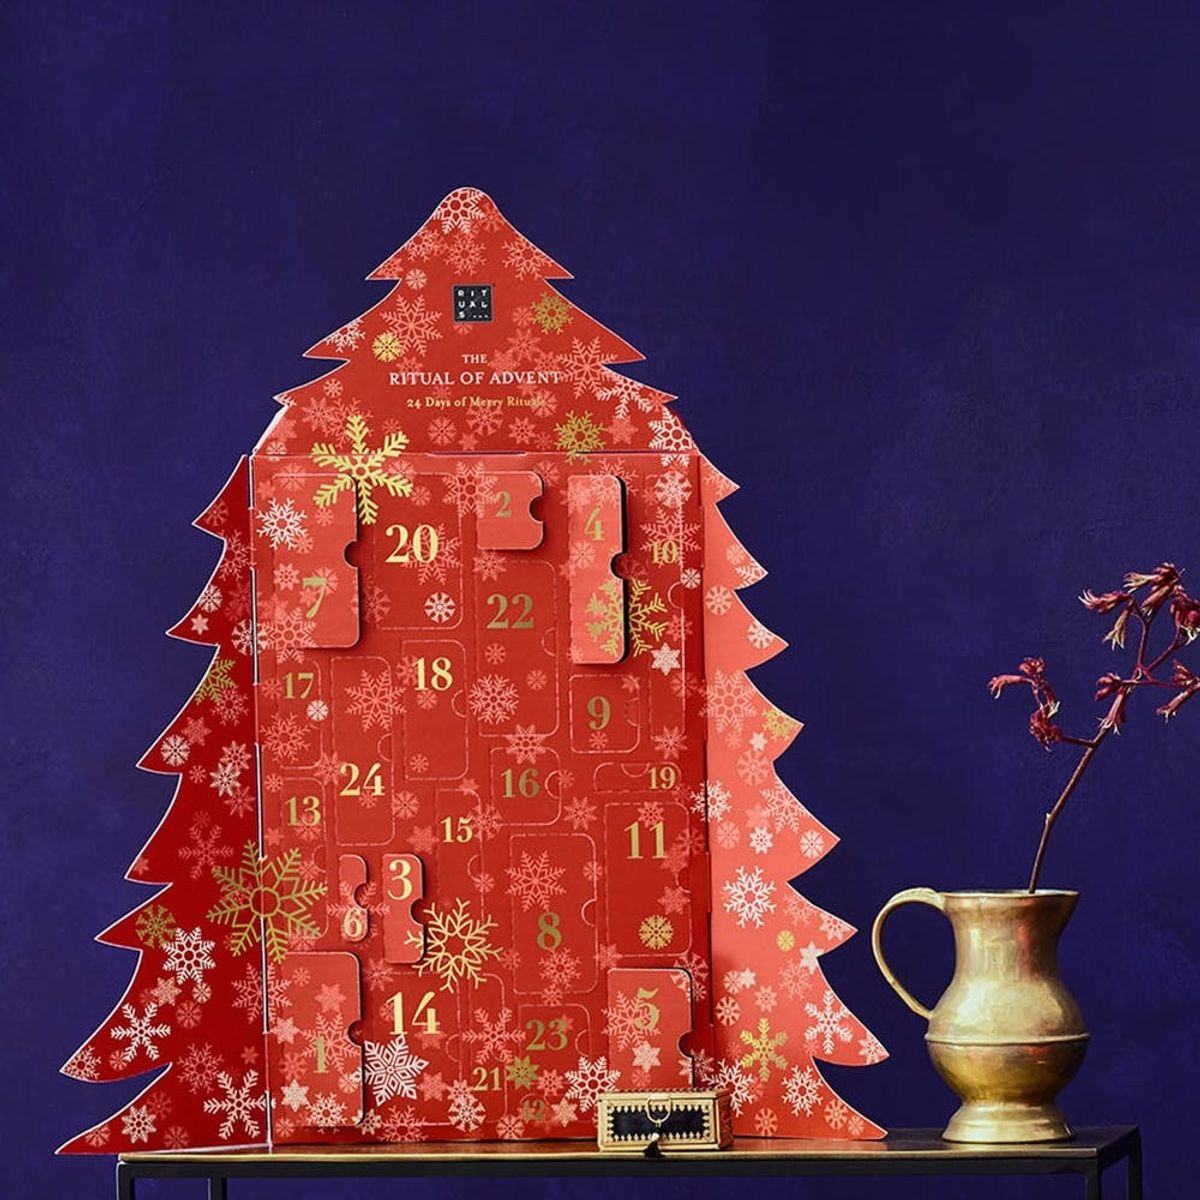 25 Beauty Advent Calendars to Get You in the Holiday Spirit